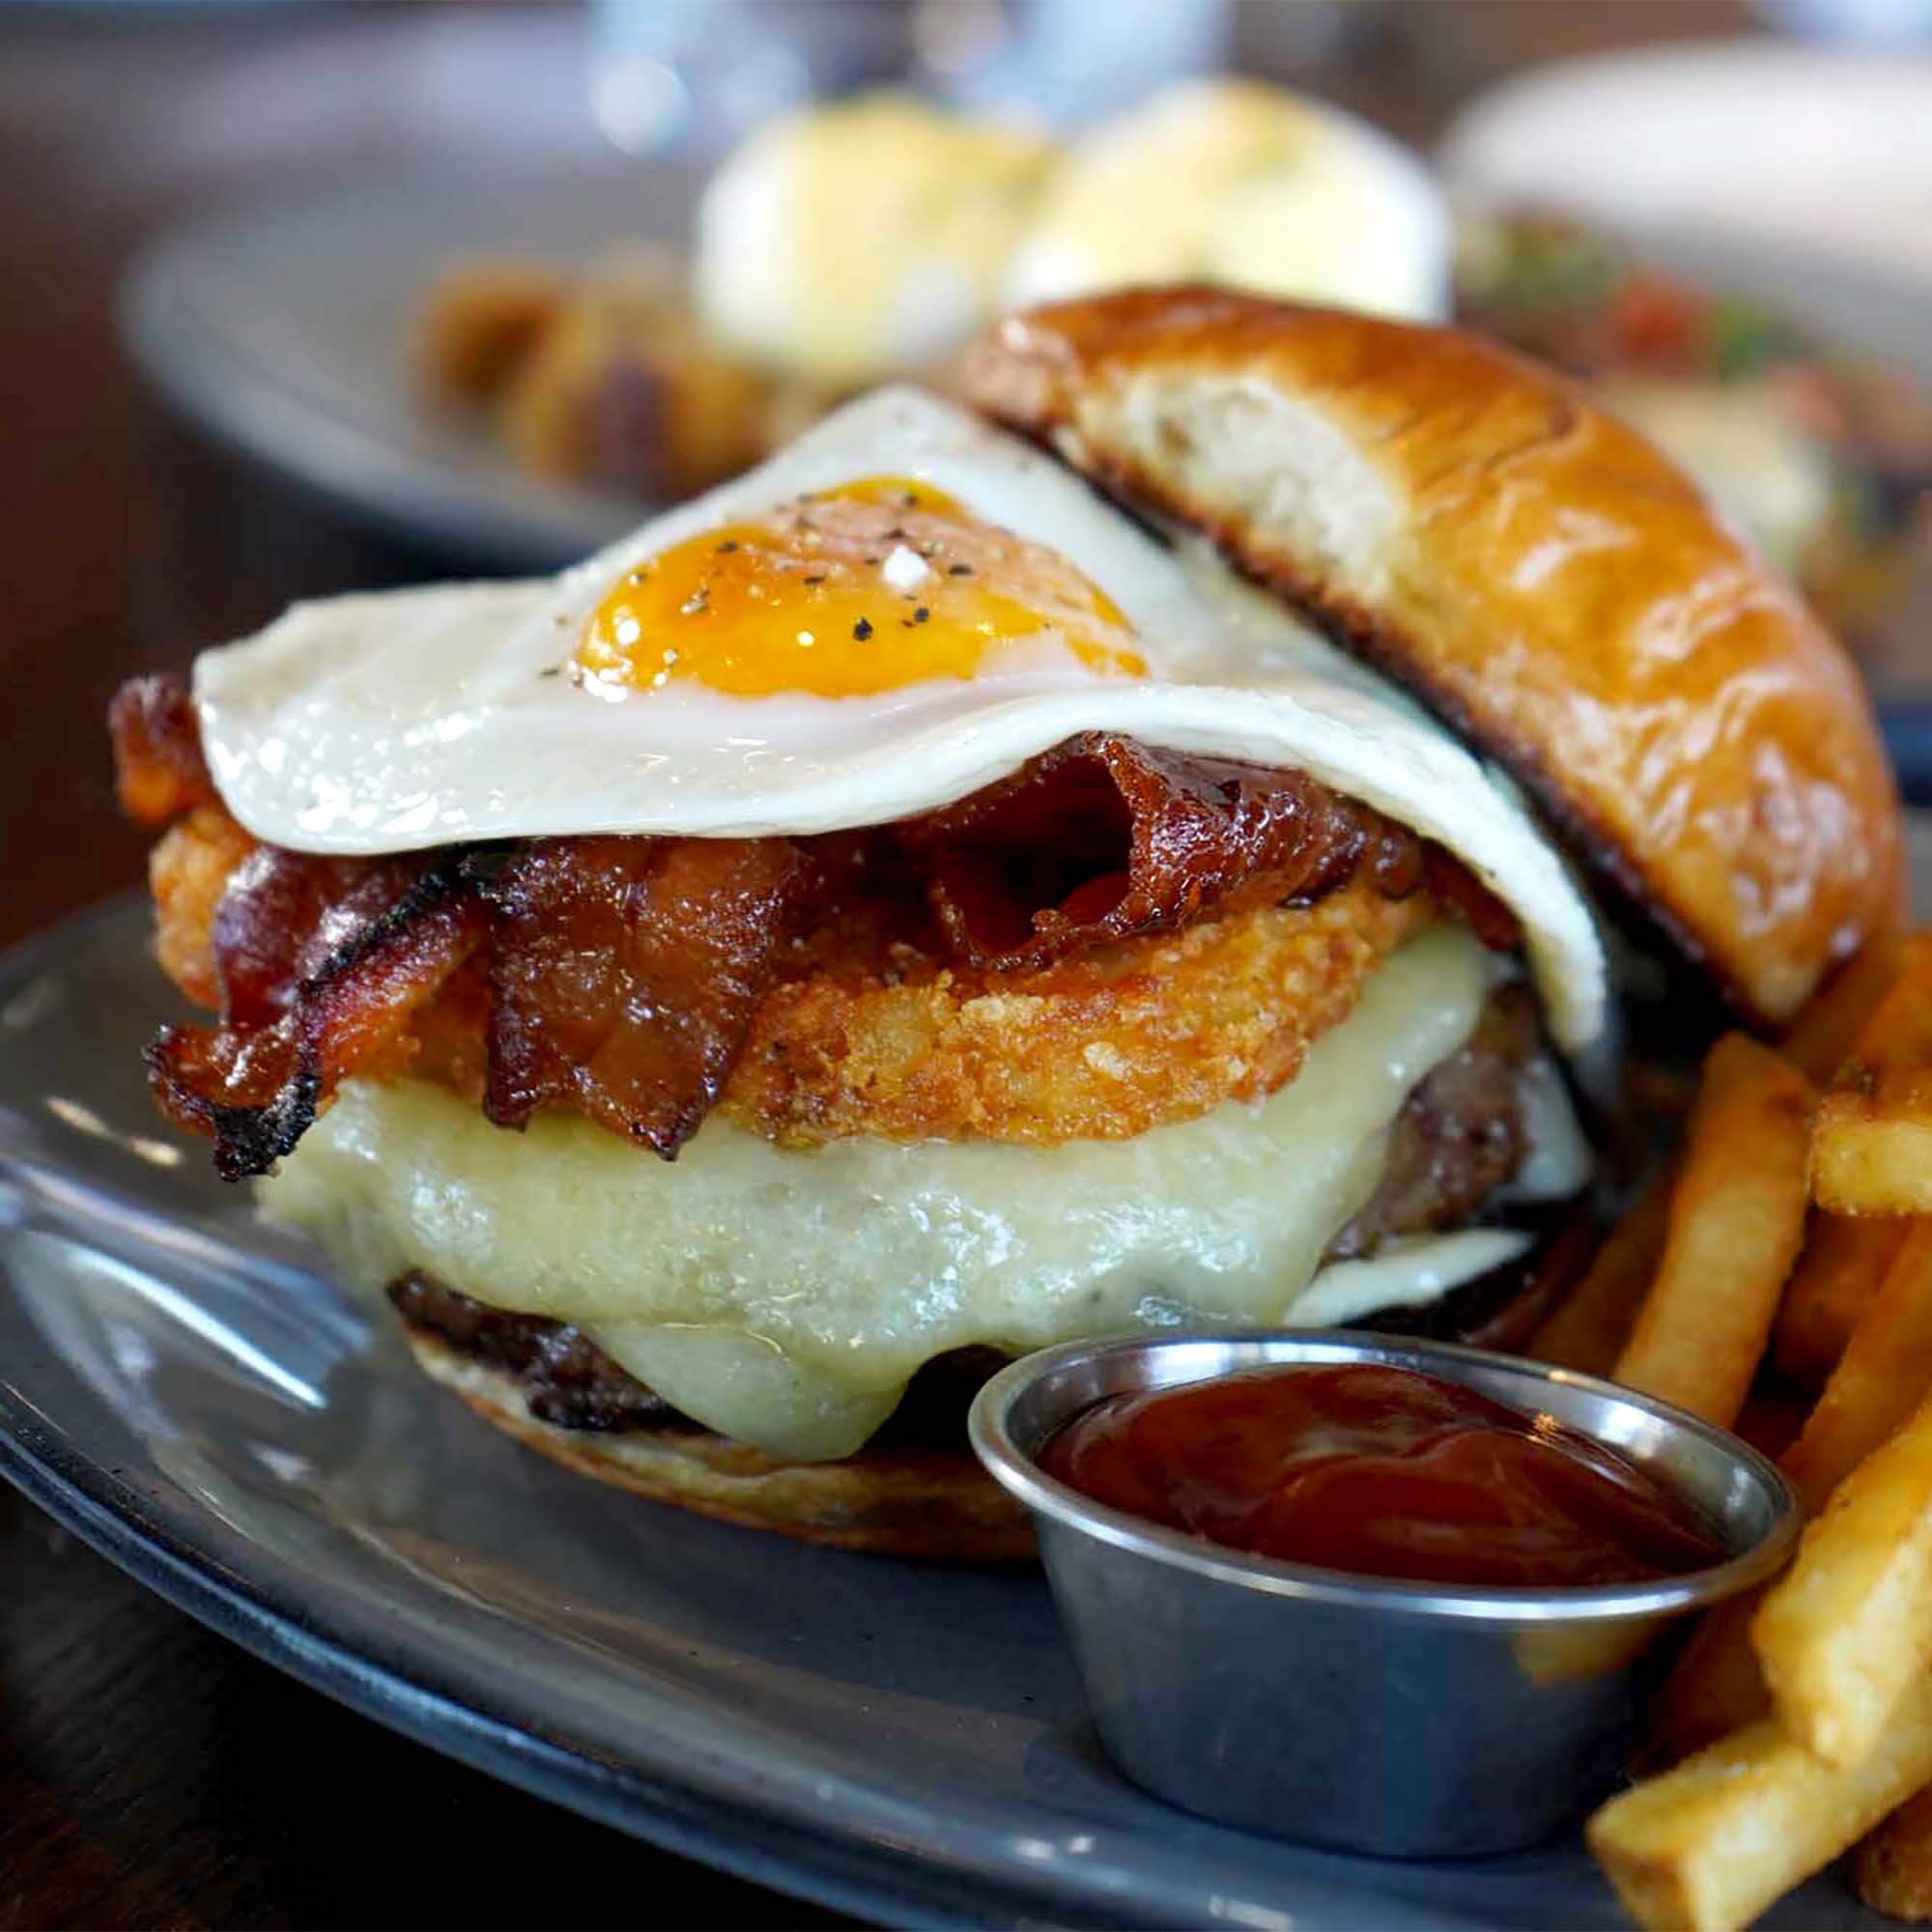 Breakfast burger topped with fried egg and bacon at Burtons Grill's Brunch